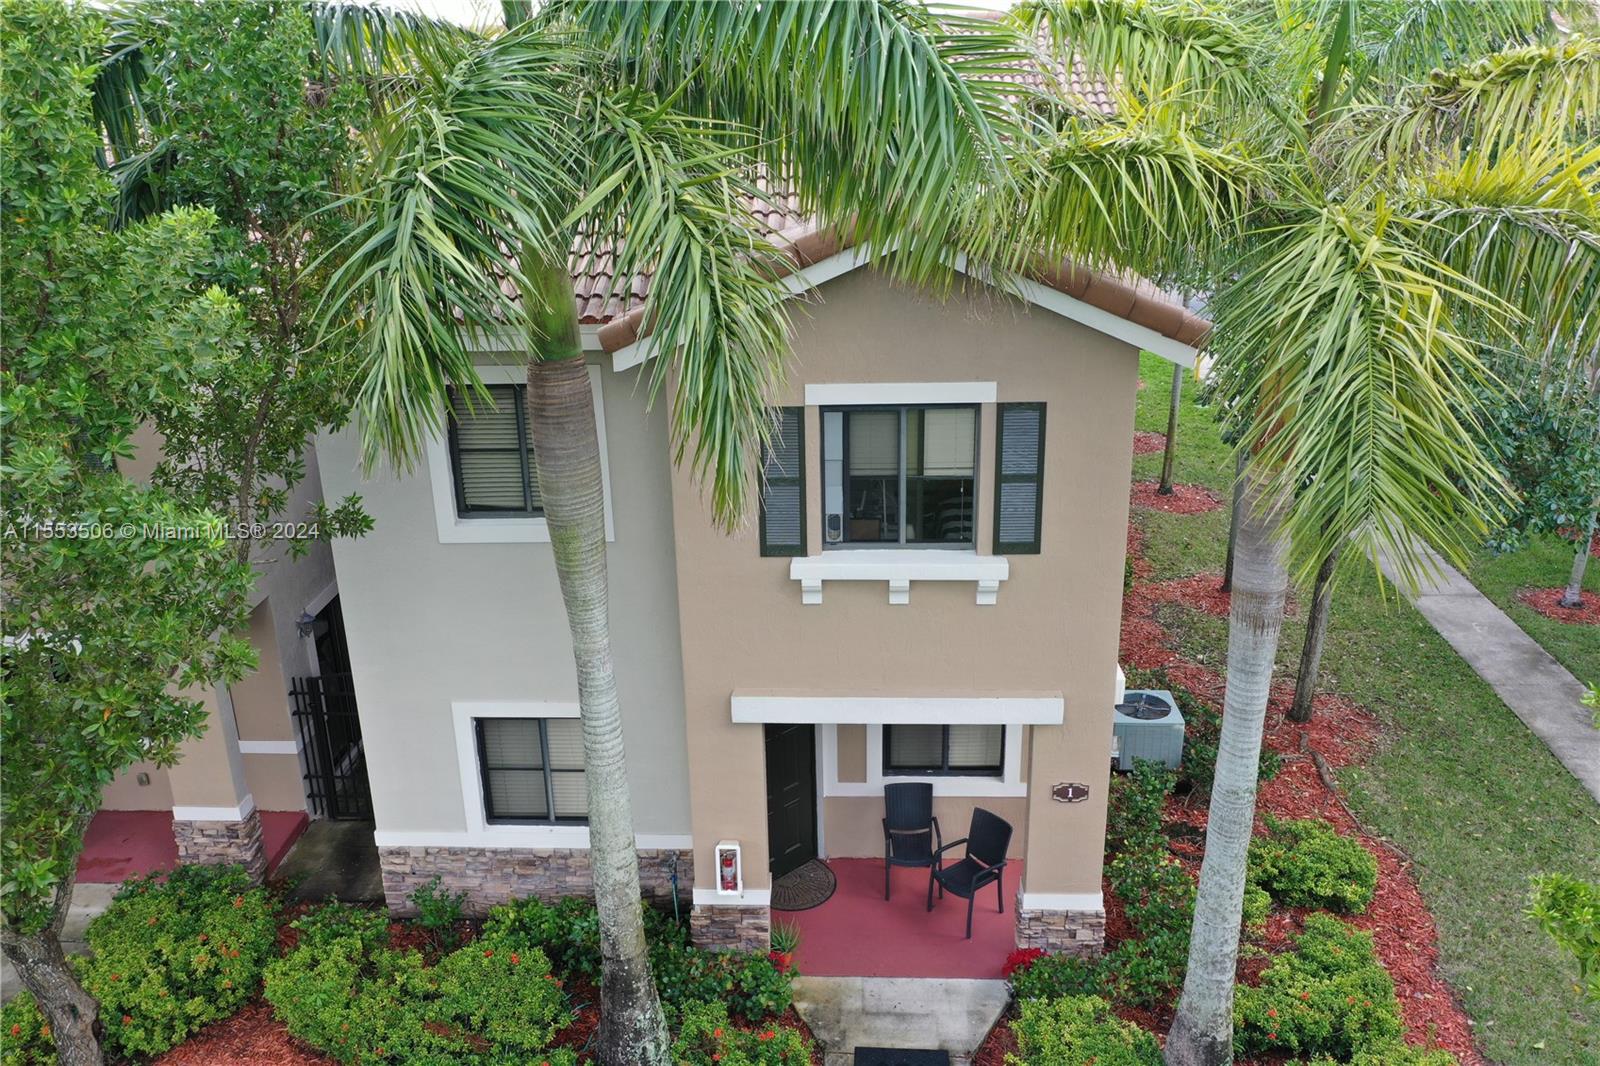 Charming corner townhouse/condo with a garden front in The Courts at the Isles of Bayshore, Cutler Bay.3 bedrooms, 2.5 bathrooms. Bedrooms upstairs with a practical split floor plan. Spacious kitchen, a generously sized master bedroom featuring a walk-in closet. Garden view. The convenience of a washer and dryer is available on the first floor. The unit comes with 1 assigned parking space and ample guest parking for the second resident. Enjoy the resort-style community with swimming pool, two clubhouses, a fitness center, a children's play area, and 24-hour security. It is within walking distance to schools, close to Black Point Marina, restaurants, and shopping centers. Plus, it's a pet-friendly community.